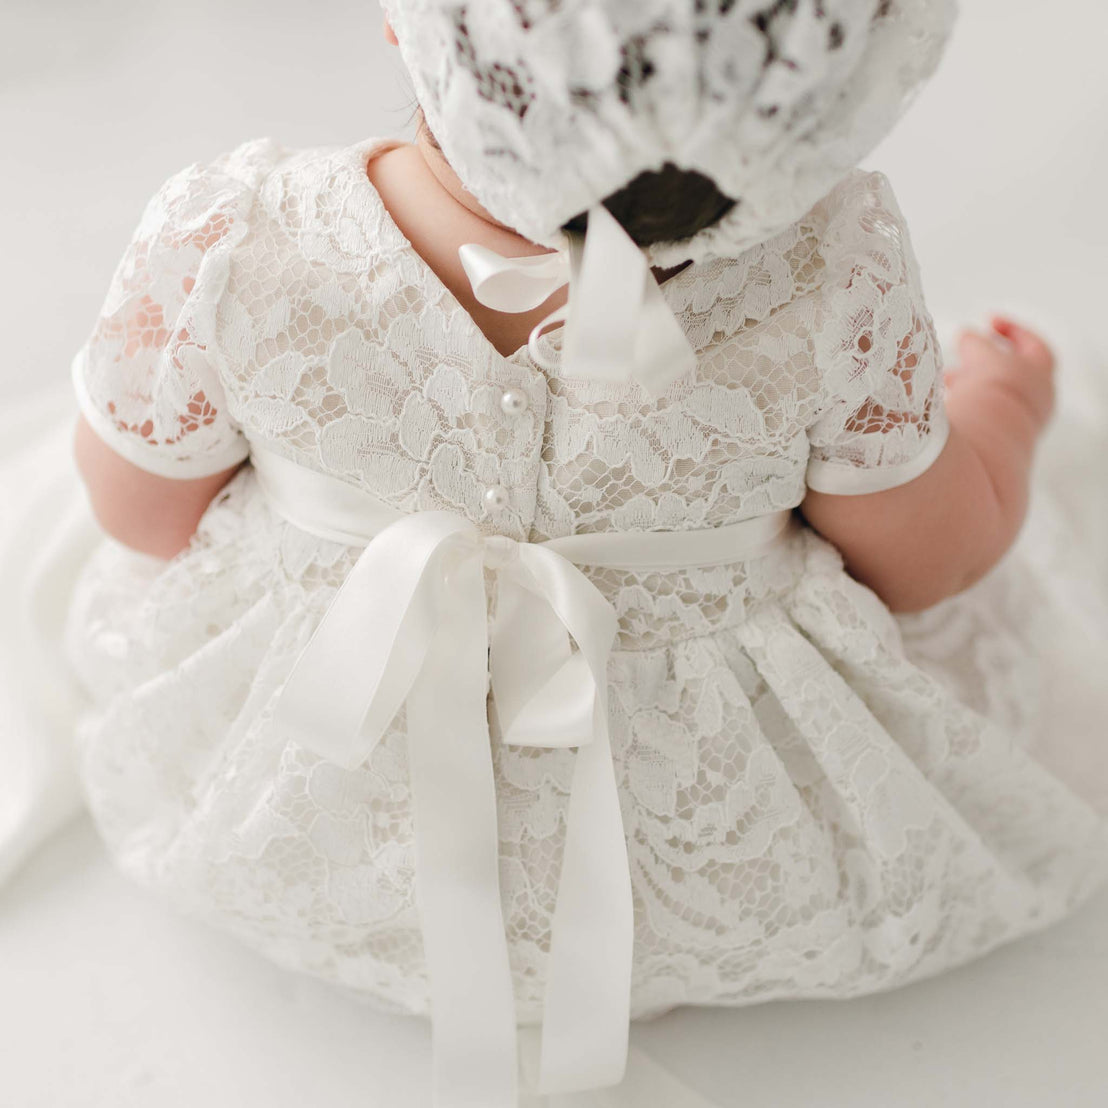 A baby wearing a delicate white Rose Christening Gown & Bonnet, viewed from behind, focusing on the details of the lace fabric and silk ribbon.